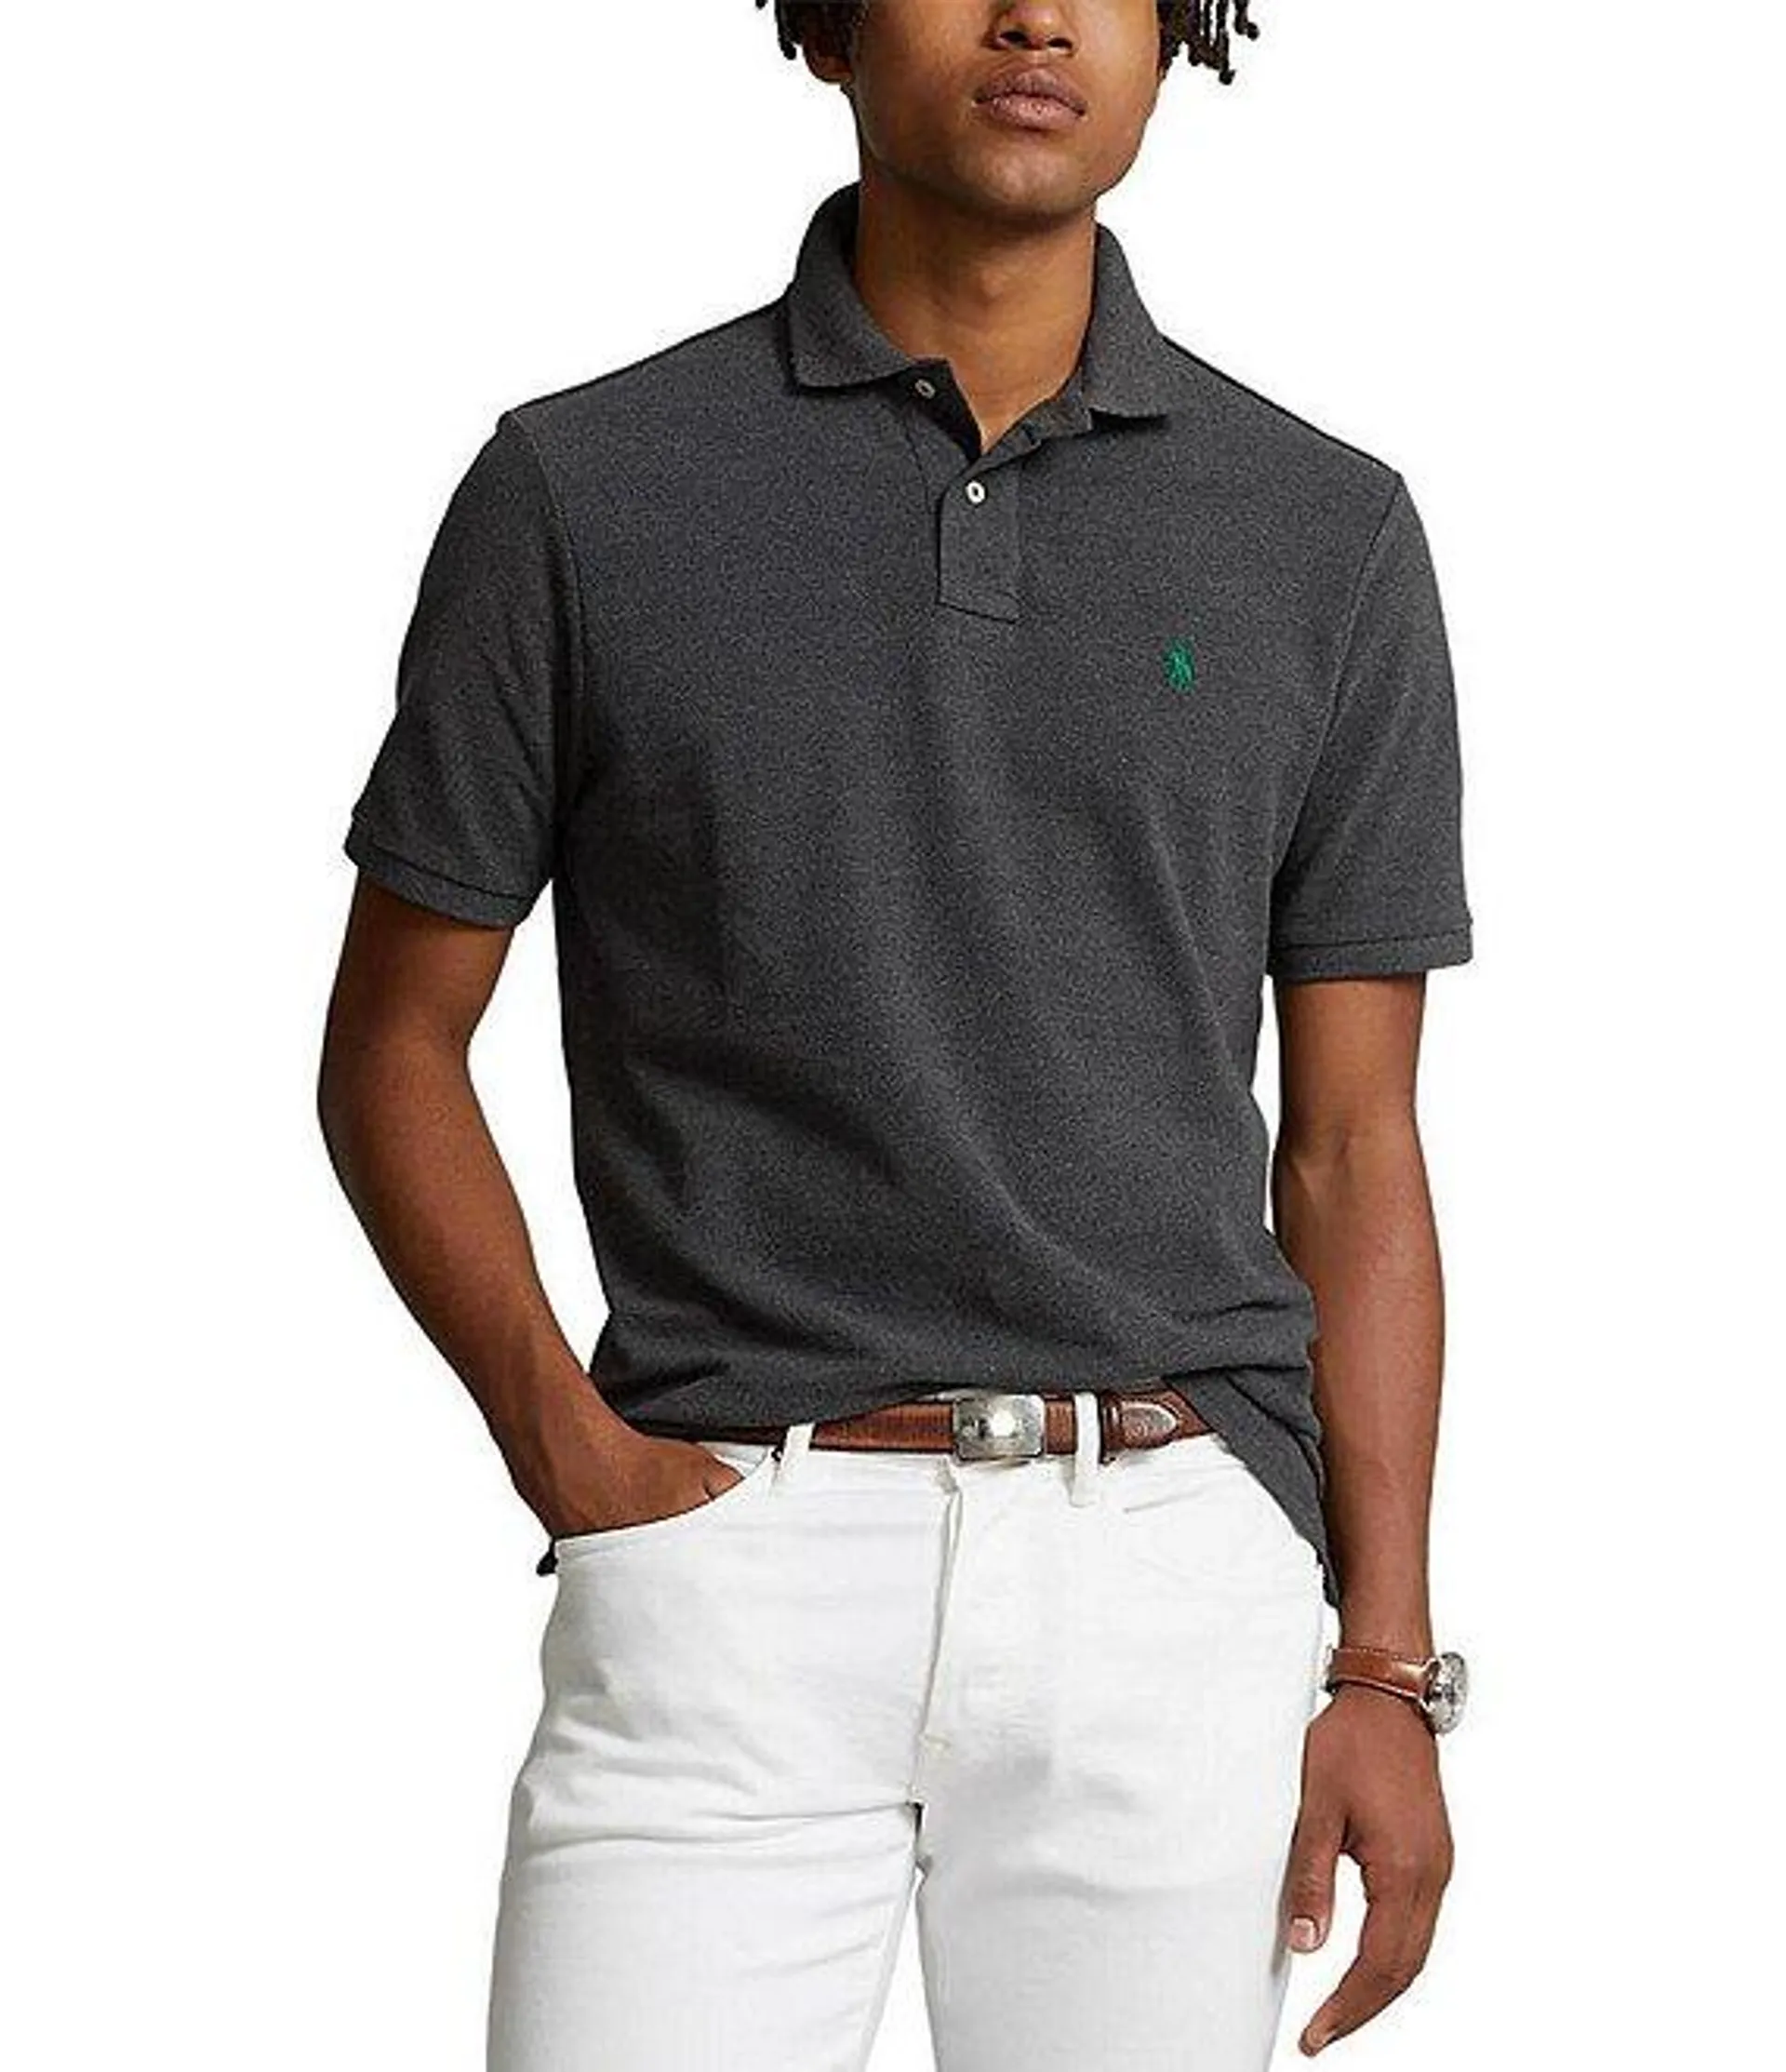 Classic Fit Solid Cotton Mesh Polo Shirt